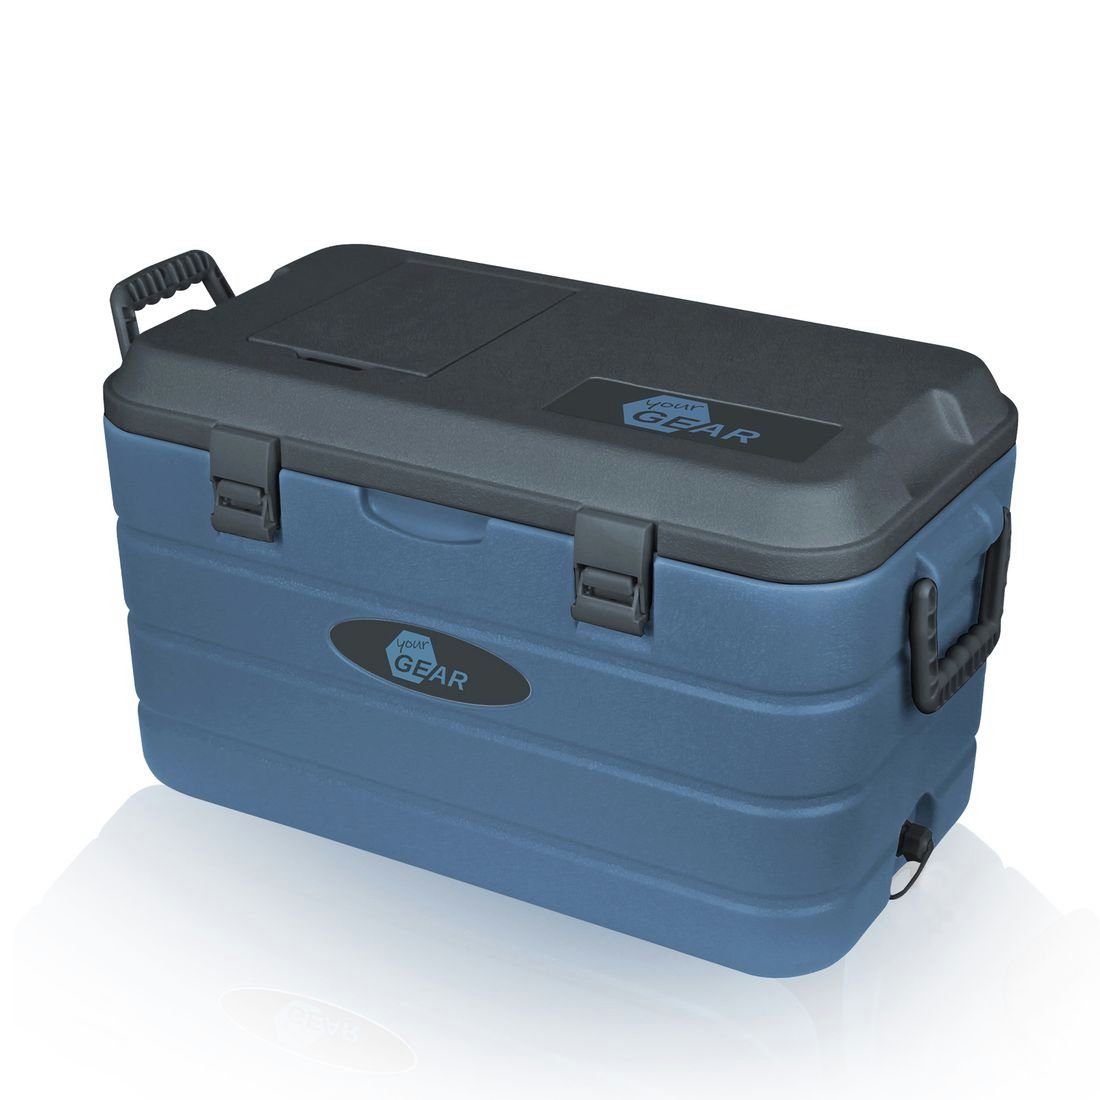 yourGEAR Thermobehälter yourGEAR Coolah 40L passiv Kühlbox Kühlbehälter Thermo-Box Kühltasche